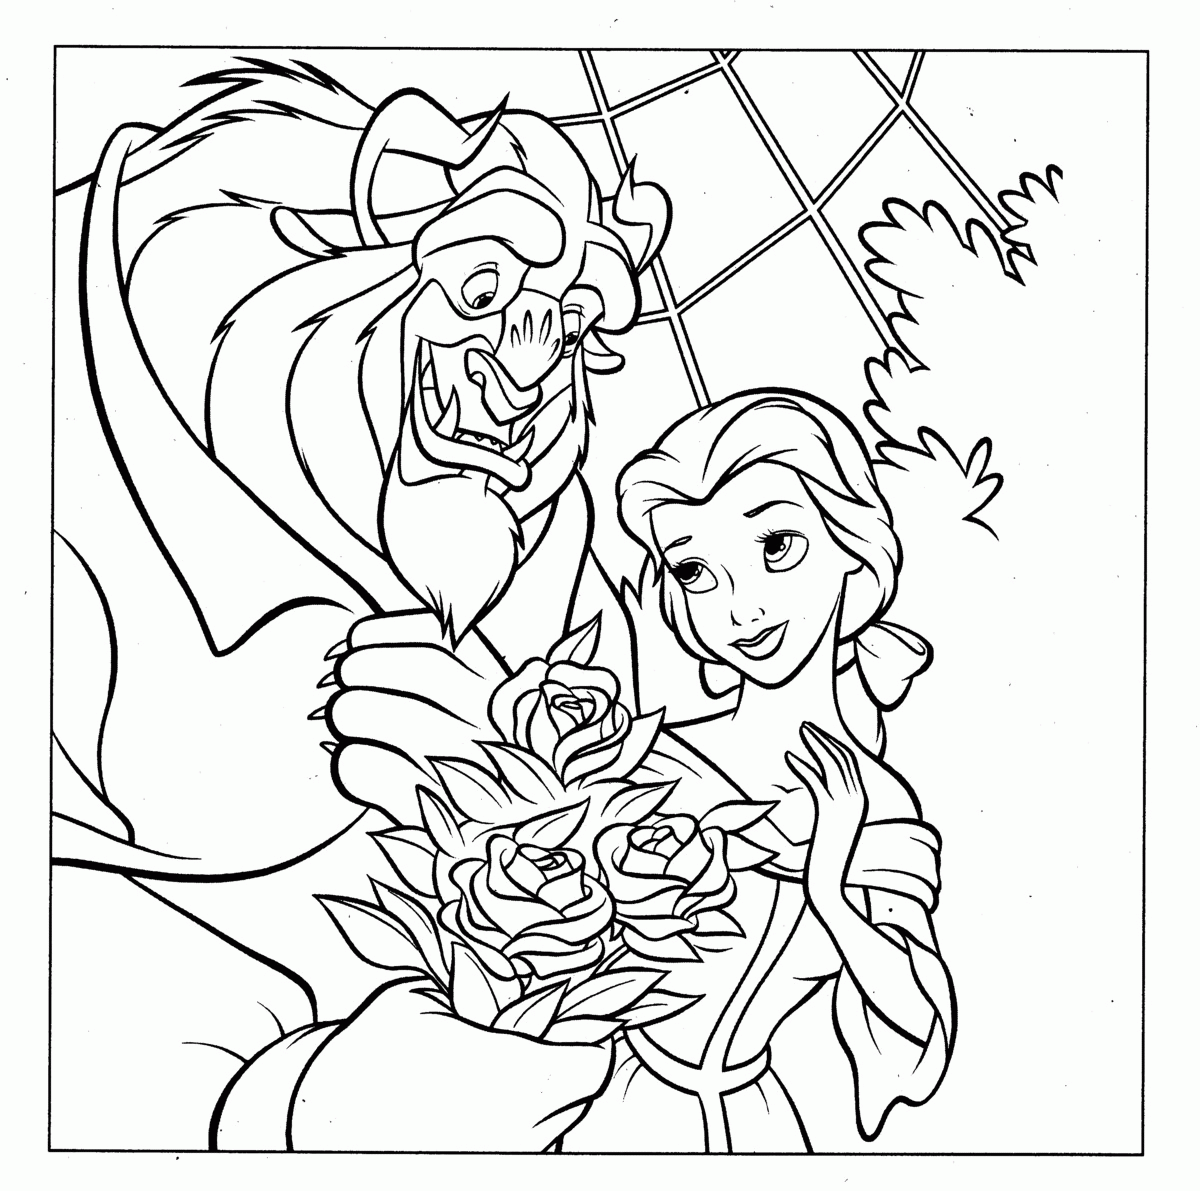 my picture: Princess Disney Coloring Page